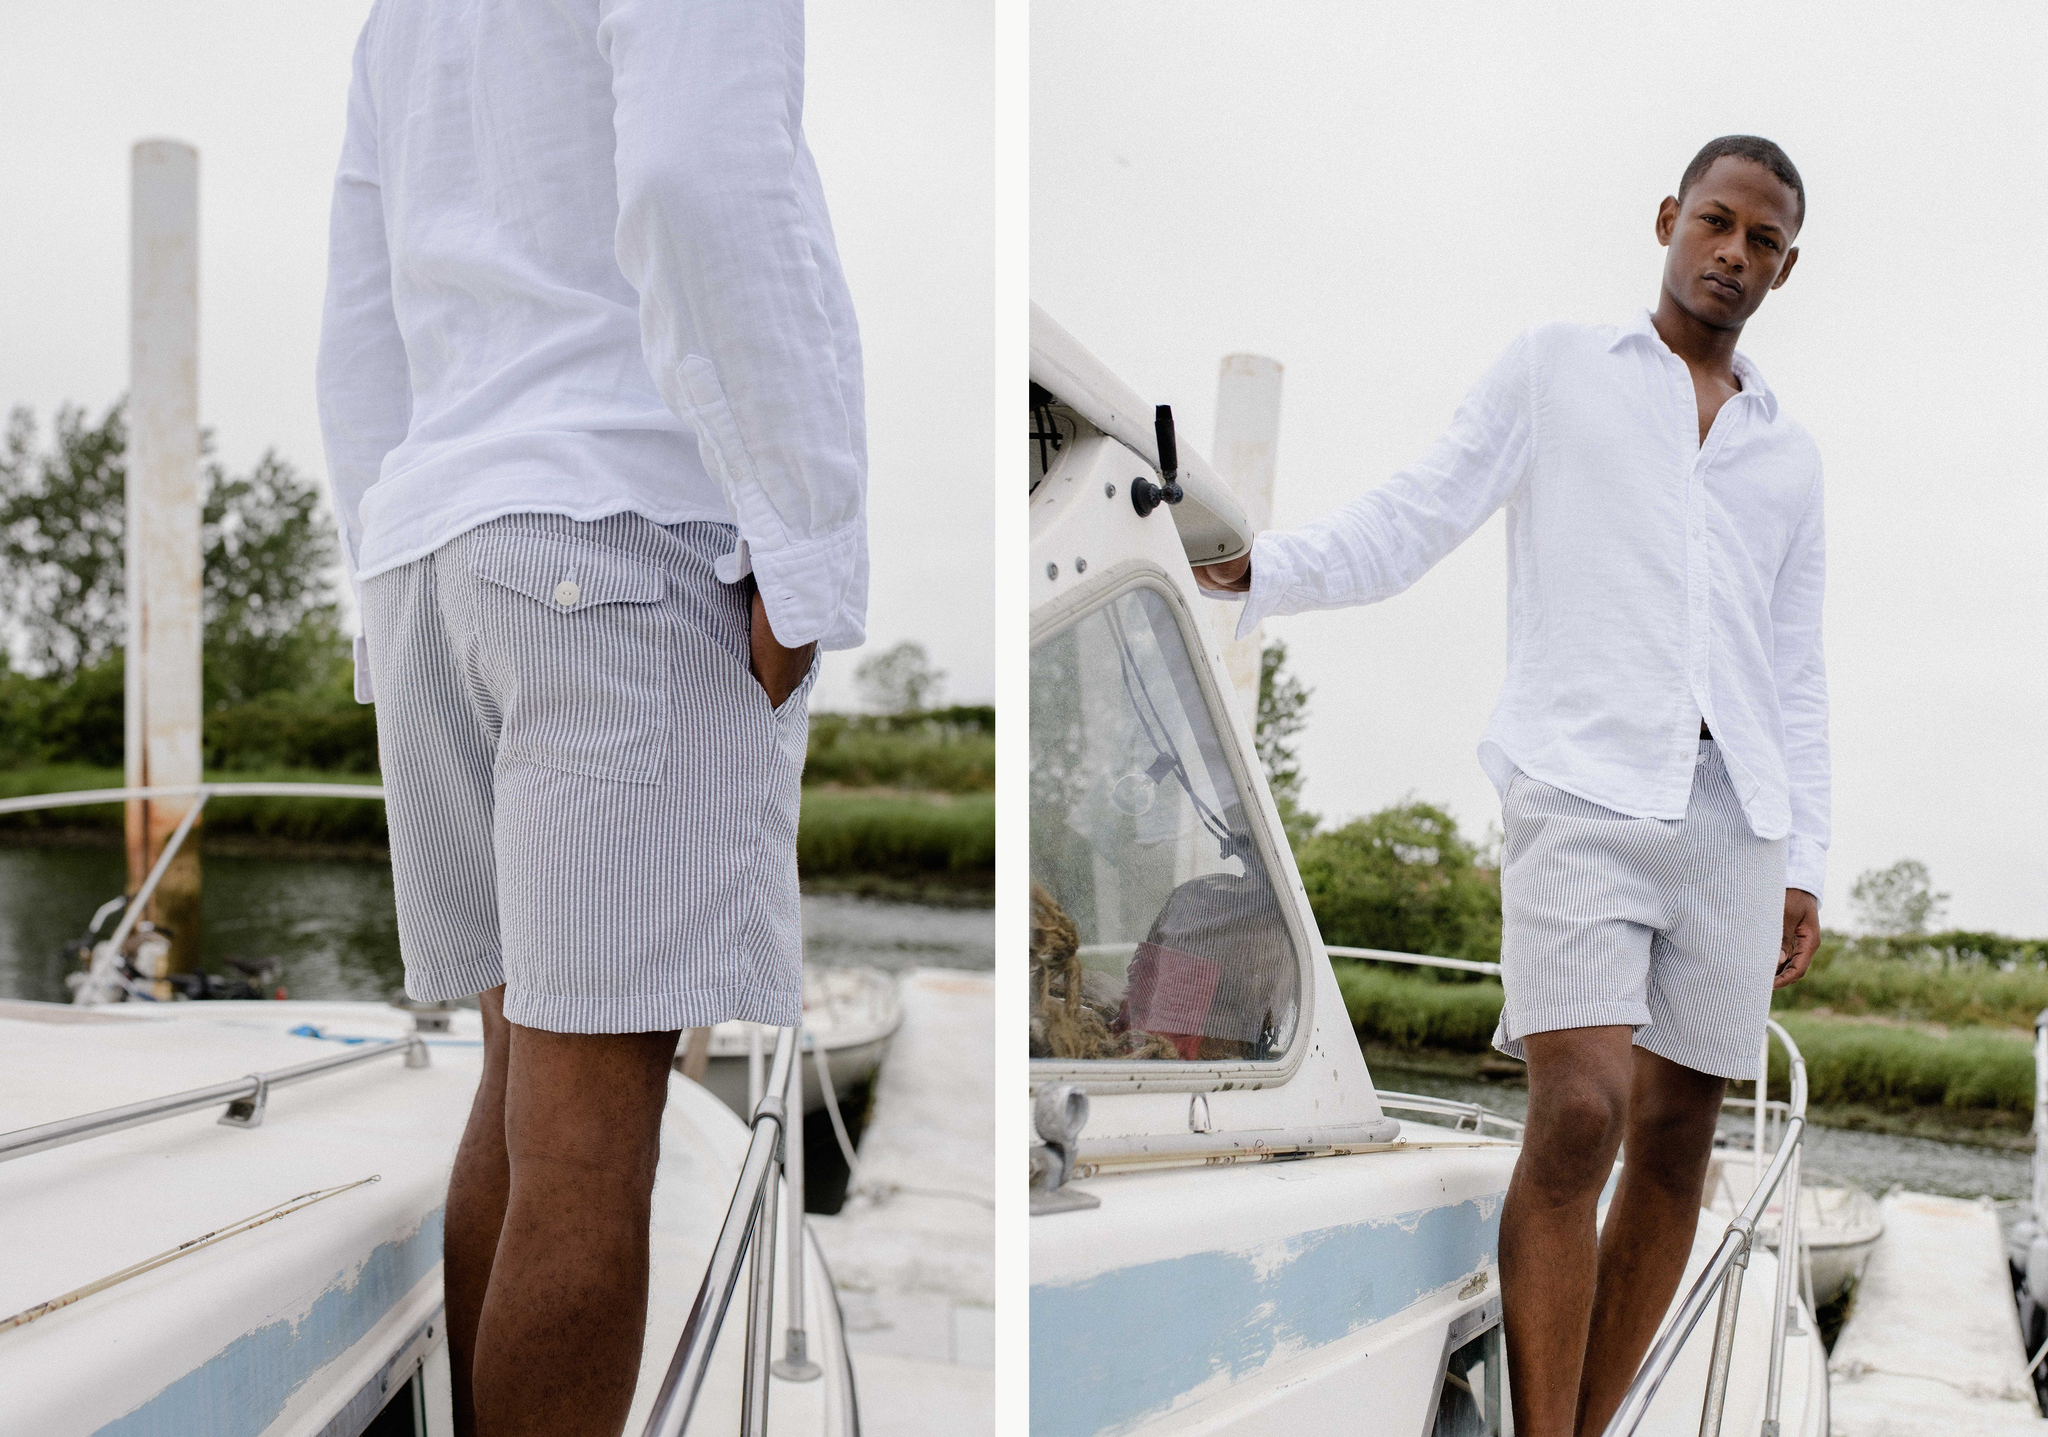 Lucas on a yacht wearing seersucker easy short in marine.  On the left it is a close up of the back of the short, on the right it is a full front view of the short and white easy shirt.